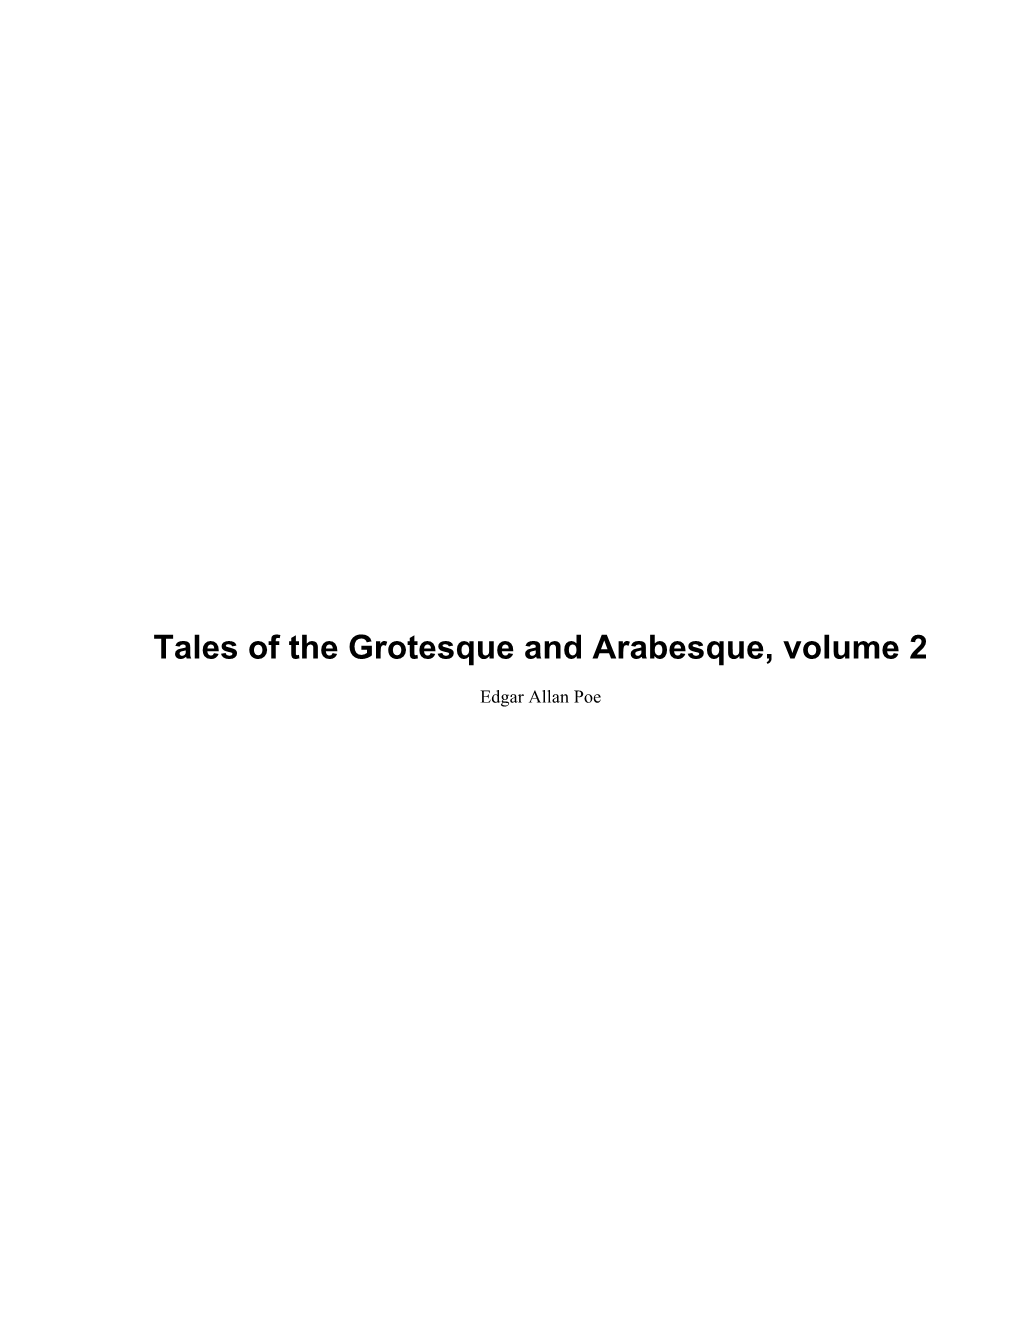 Tales of the Grotesque and Arabesque, Volume 2